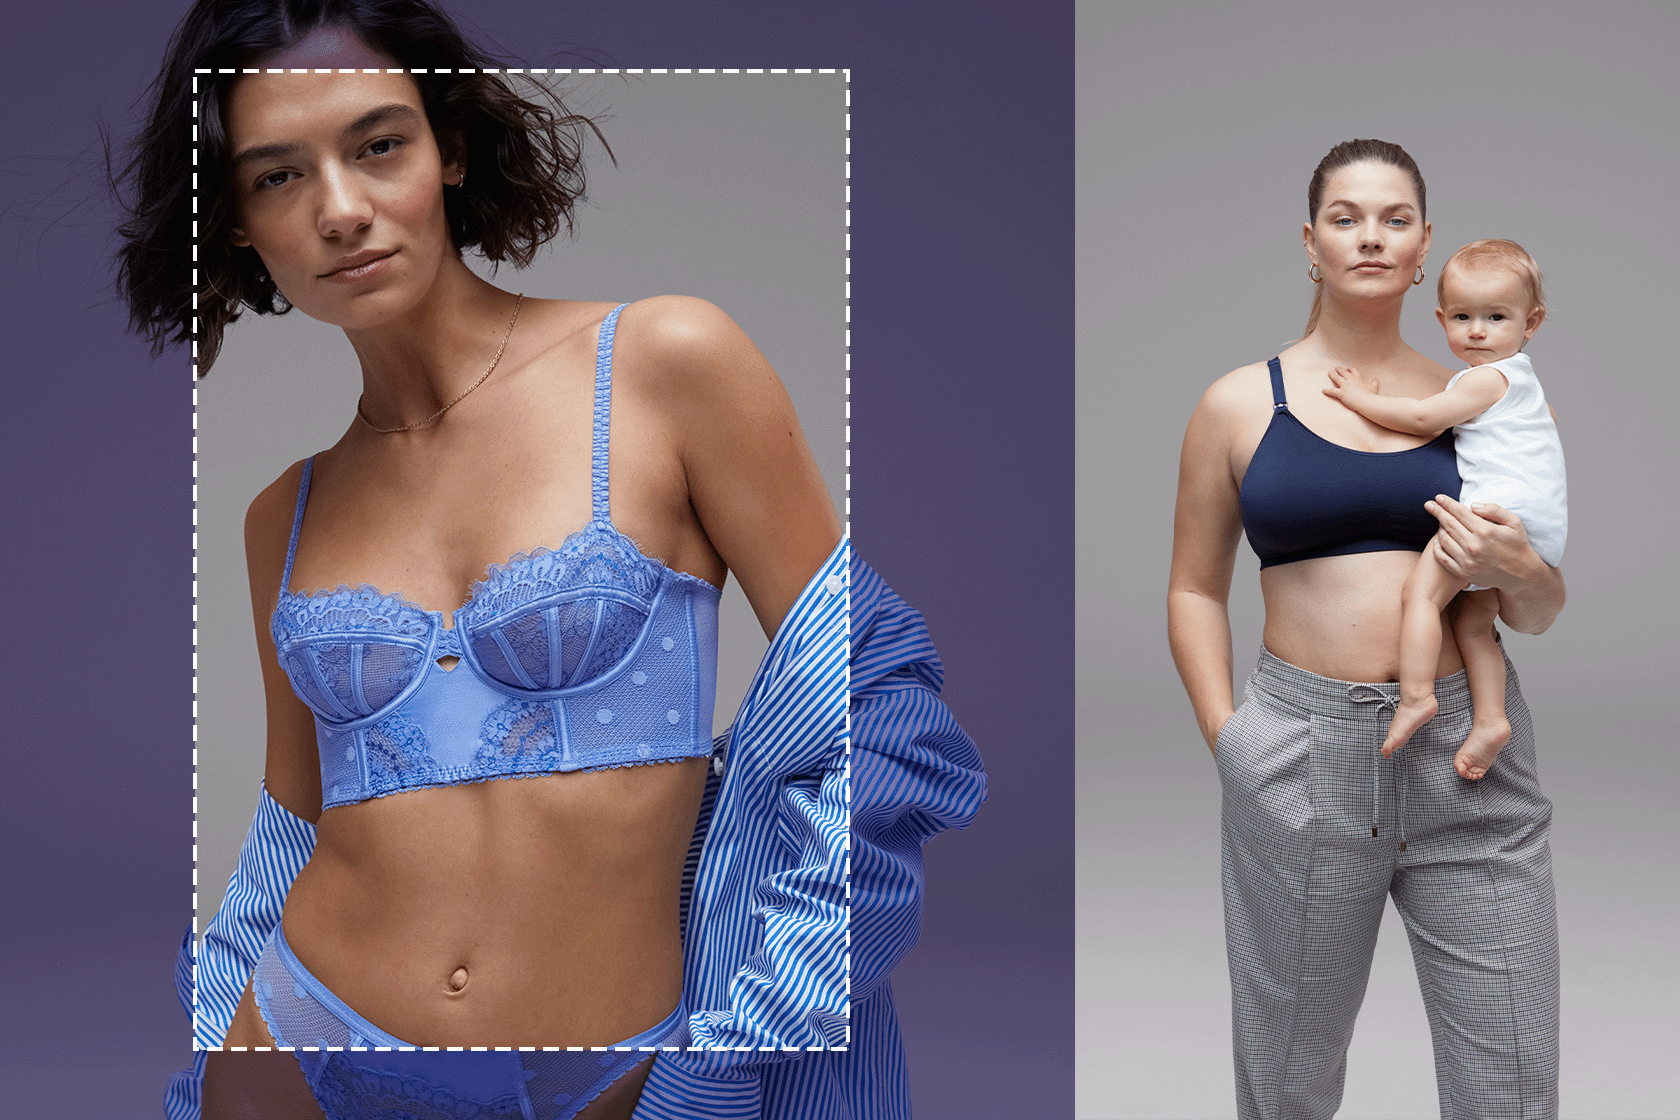 Marks and Spencer Jersey - This month is Bra Fit Month, and you owe it to  yourself to have regular professional bra fittings. Wearing the correct size  takes the weight off your